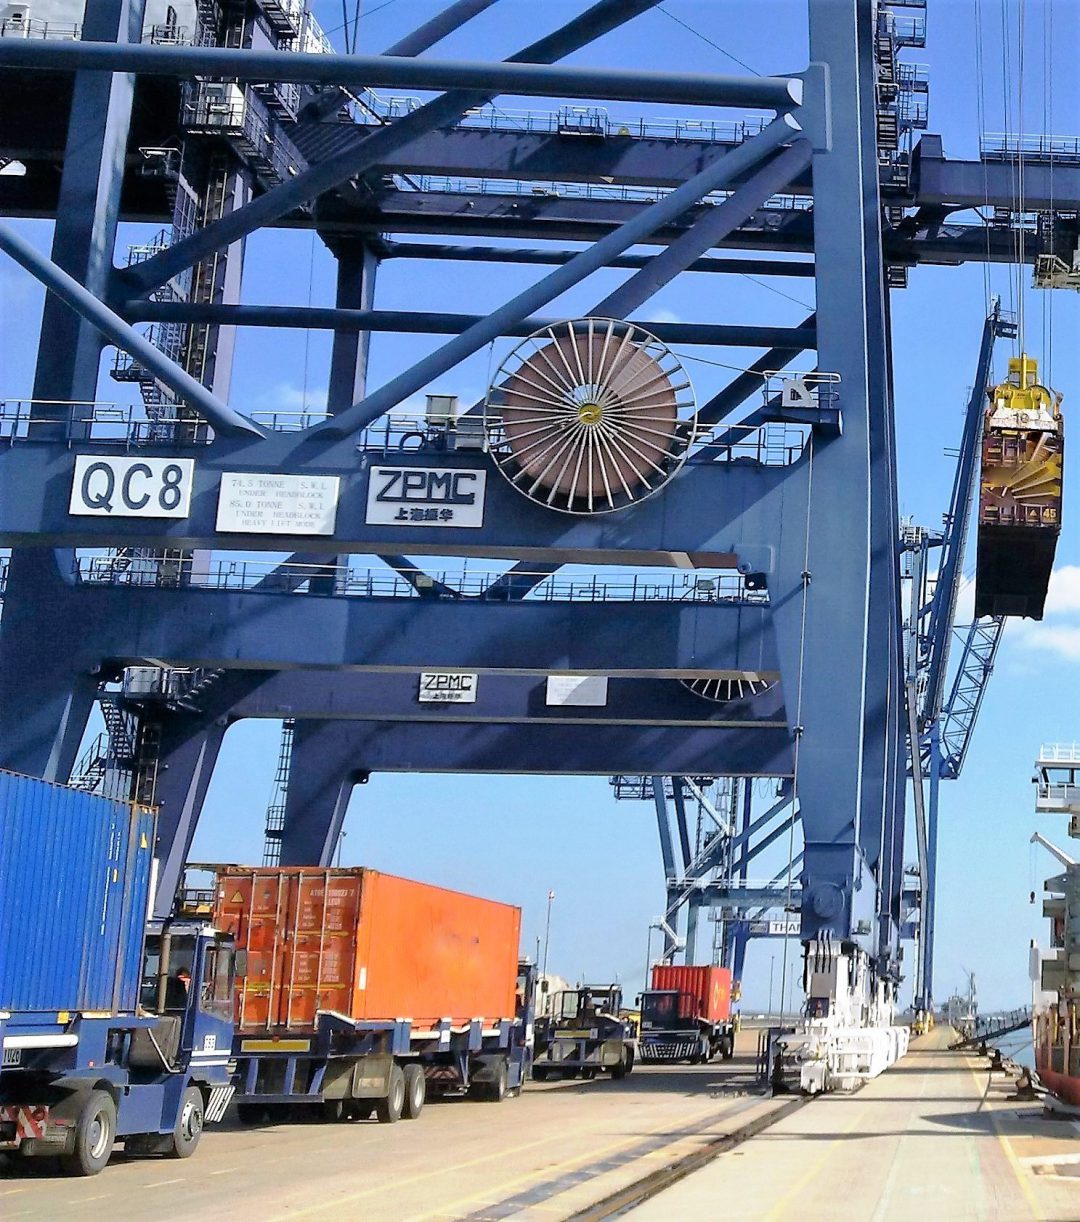 Short sea container services boost for Hutchison Ports London Thamesport. Image: Hutchison Ports